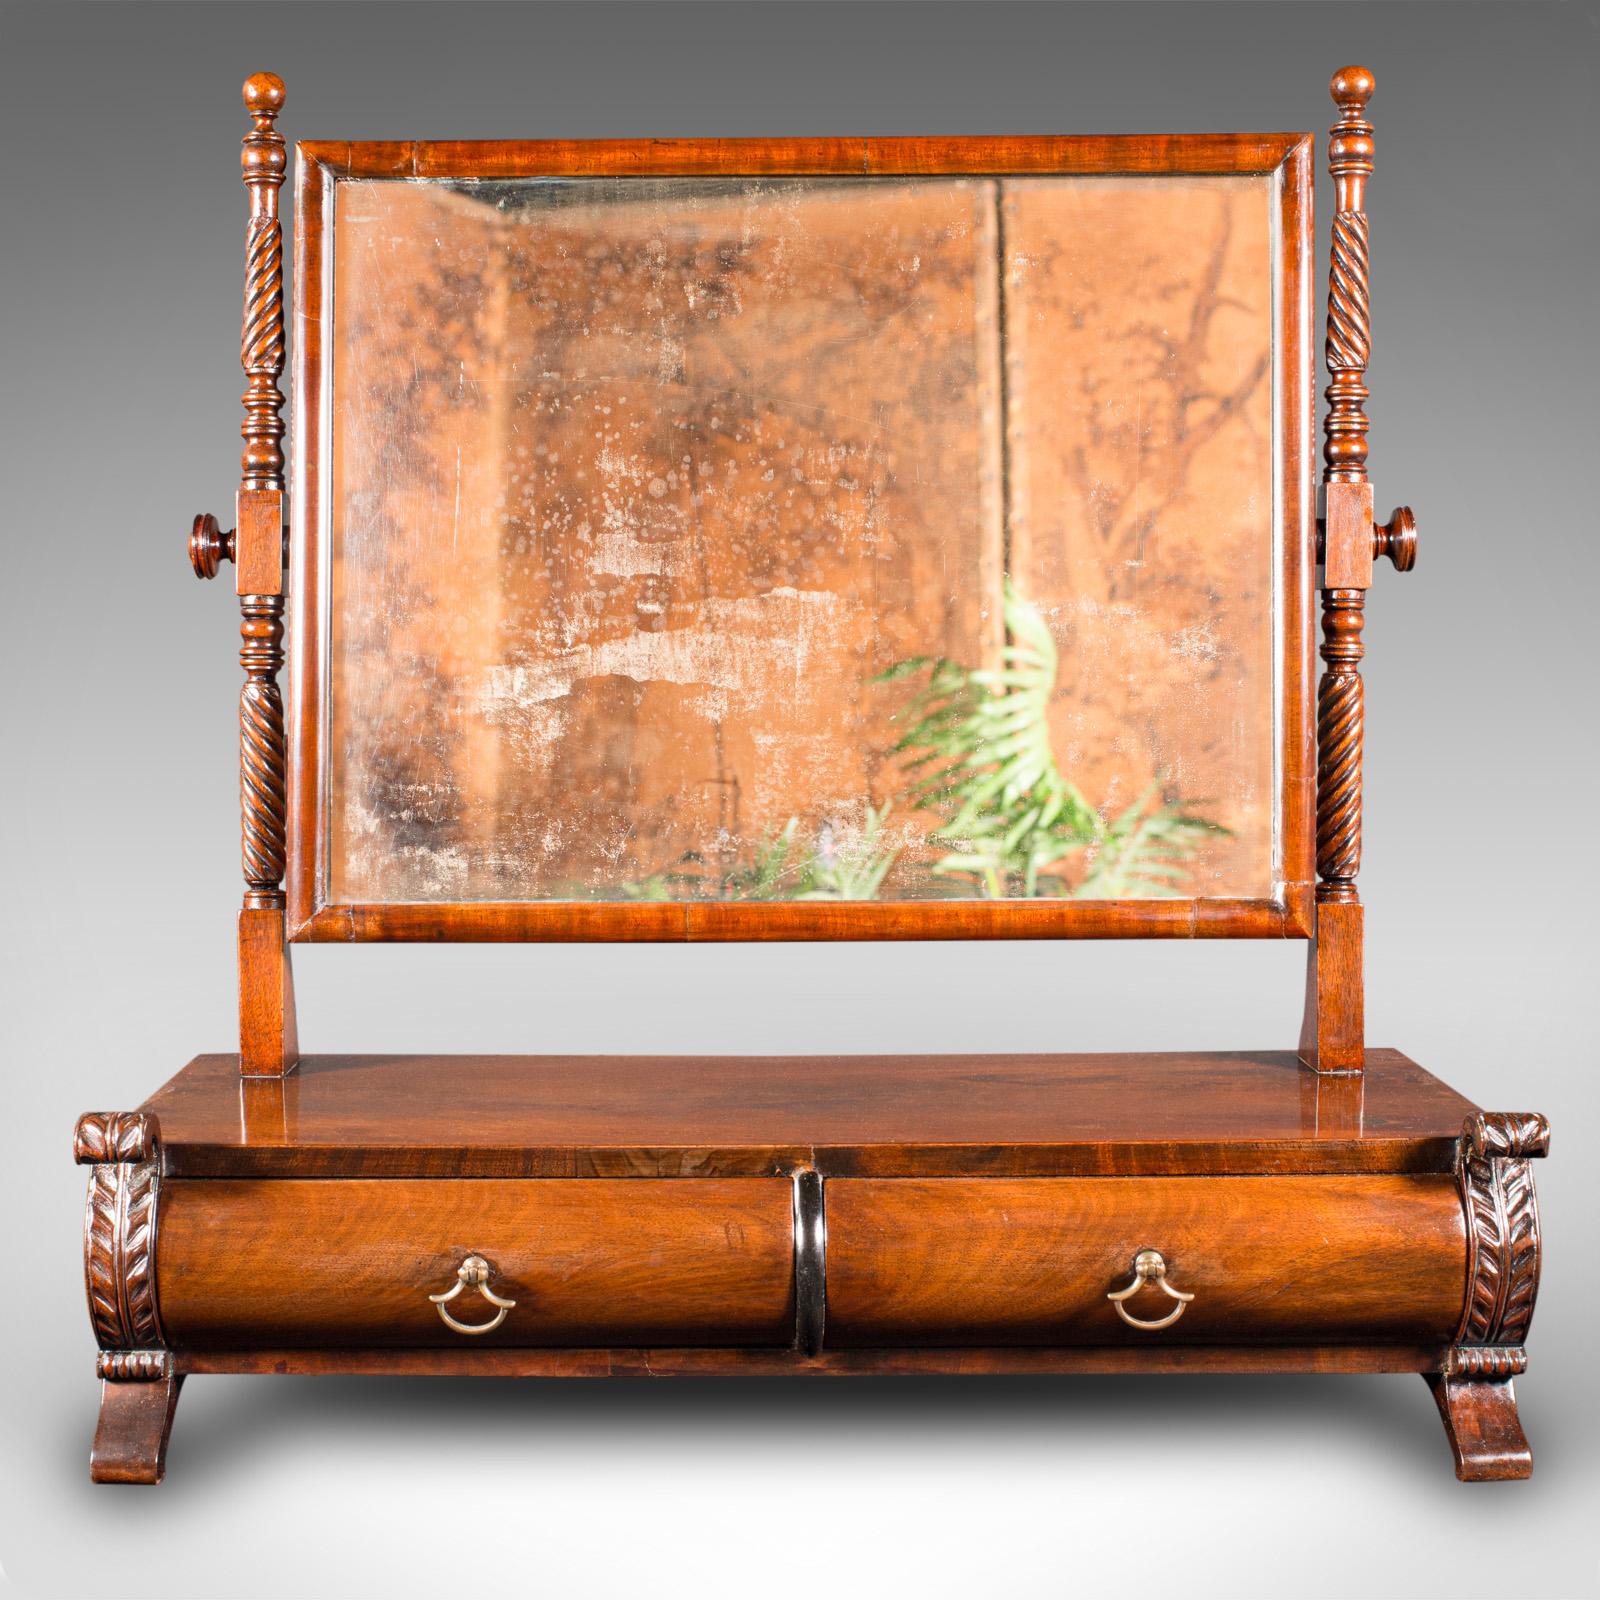 This is an antique dressing mirror. An English, flame mahogany bedroom tabletop mirror, dating to the early Victorian period, circa 1850.

Gaze upon this fascinating dressing mirror, with attractive finish
Displays a desirable aged patina